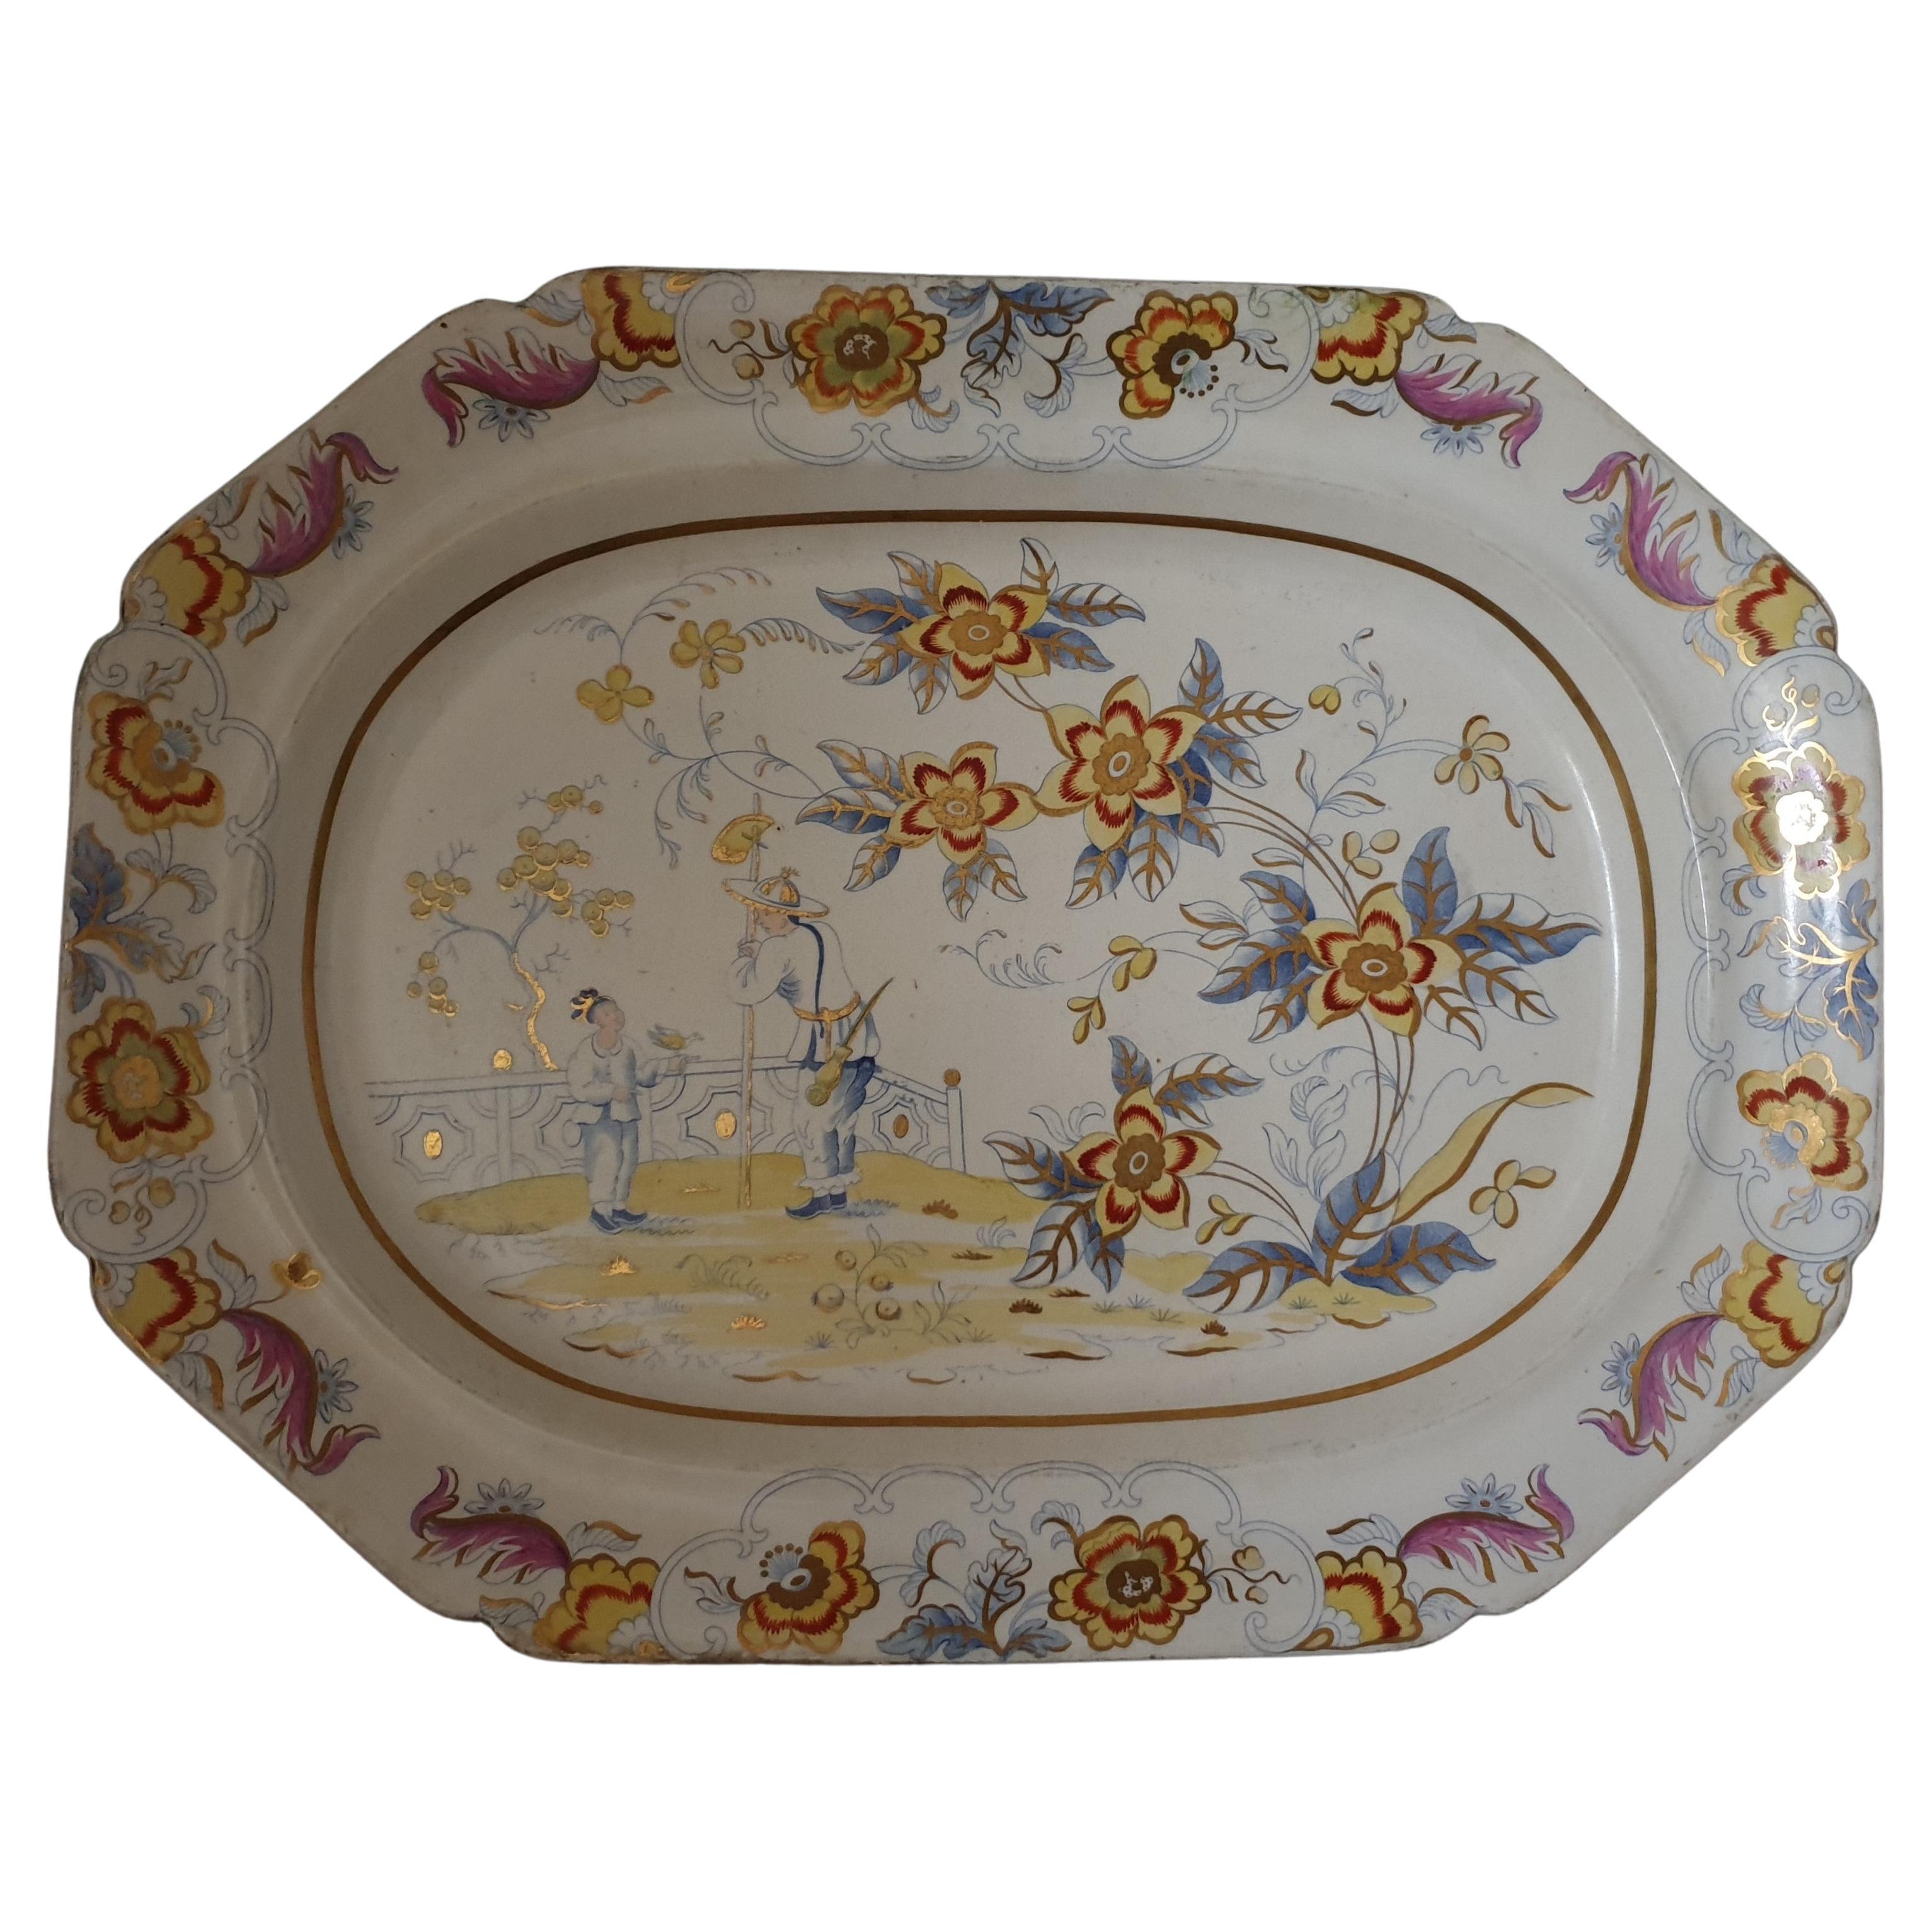 Cambria Pattern Platter by Charles Heathcote & Co For Sale